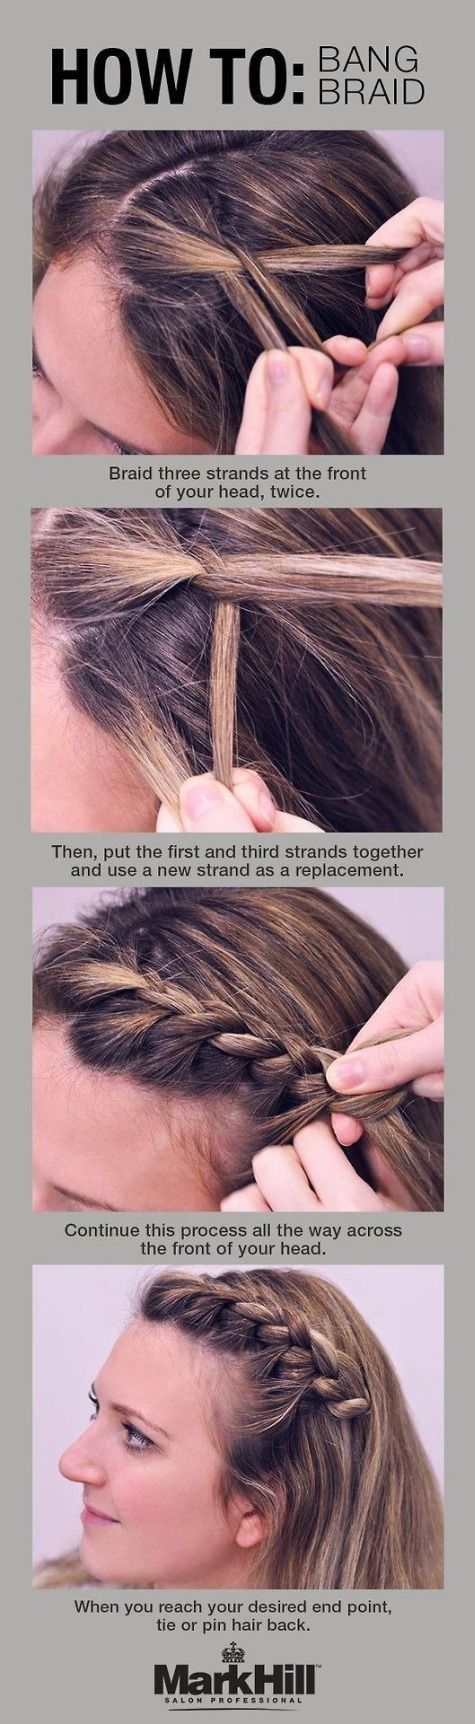 How-to-bang-braid about